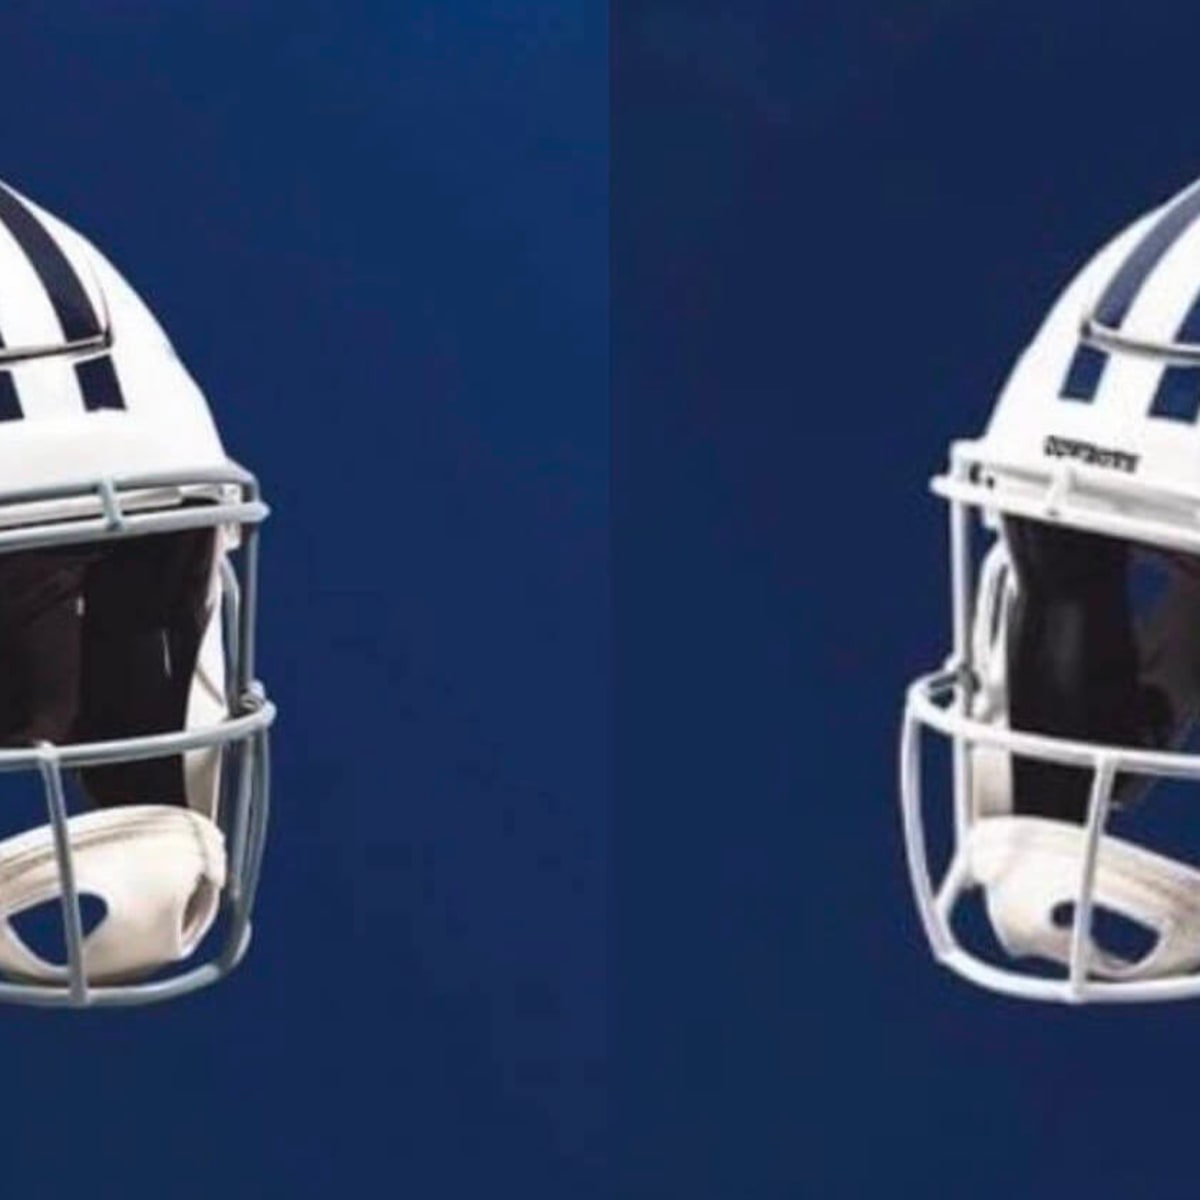 Dallas Cowboys bring back Double-Star look with Color Rush